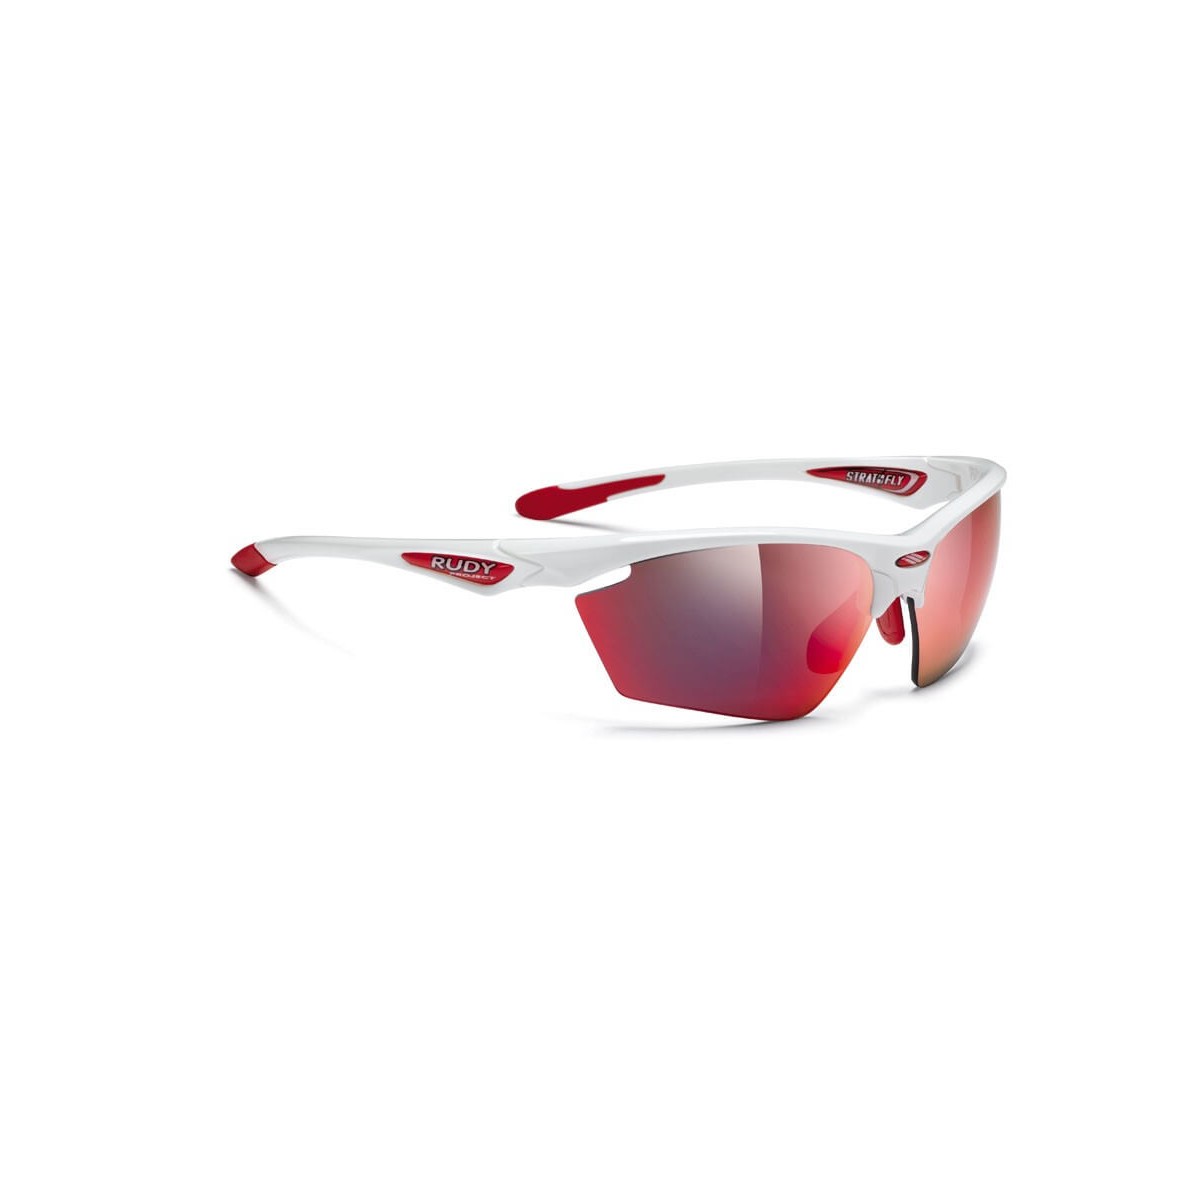 Image of Brille Stratofly White Gloss RPO Multilaser Rot Rudy Projekt